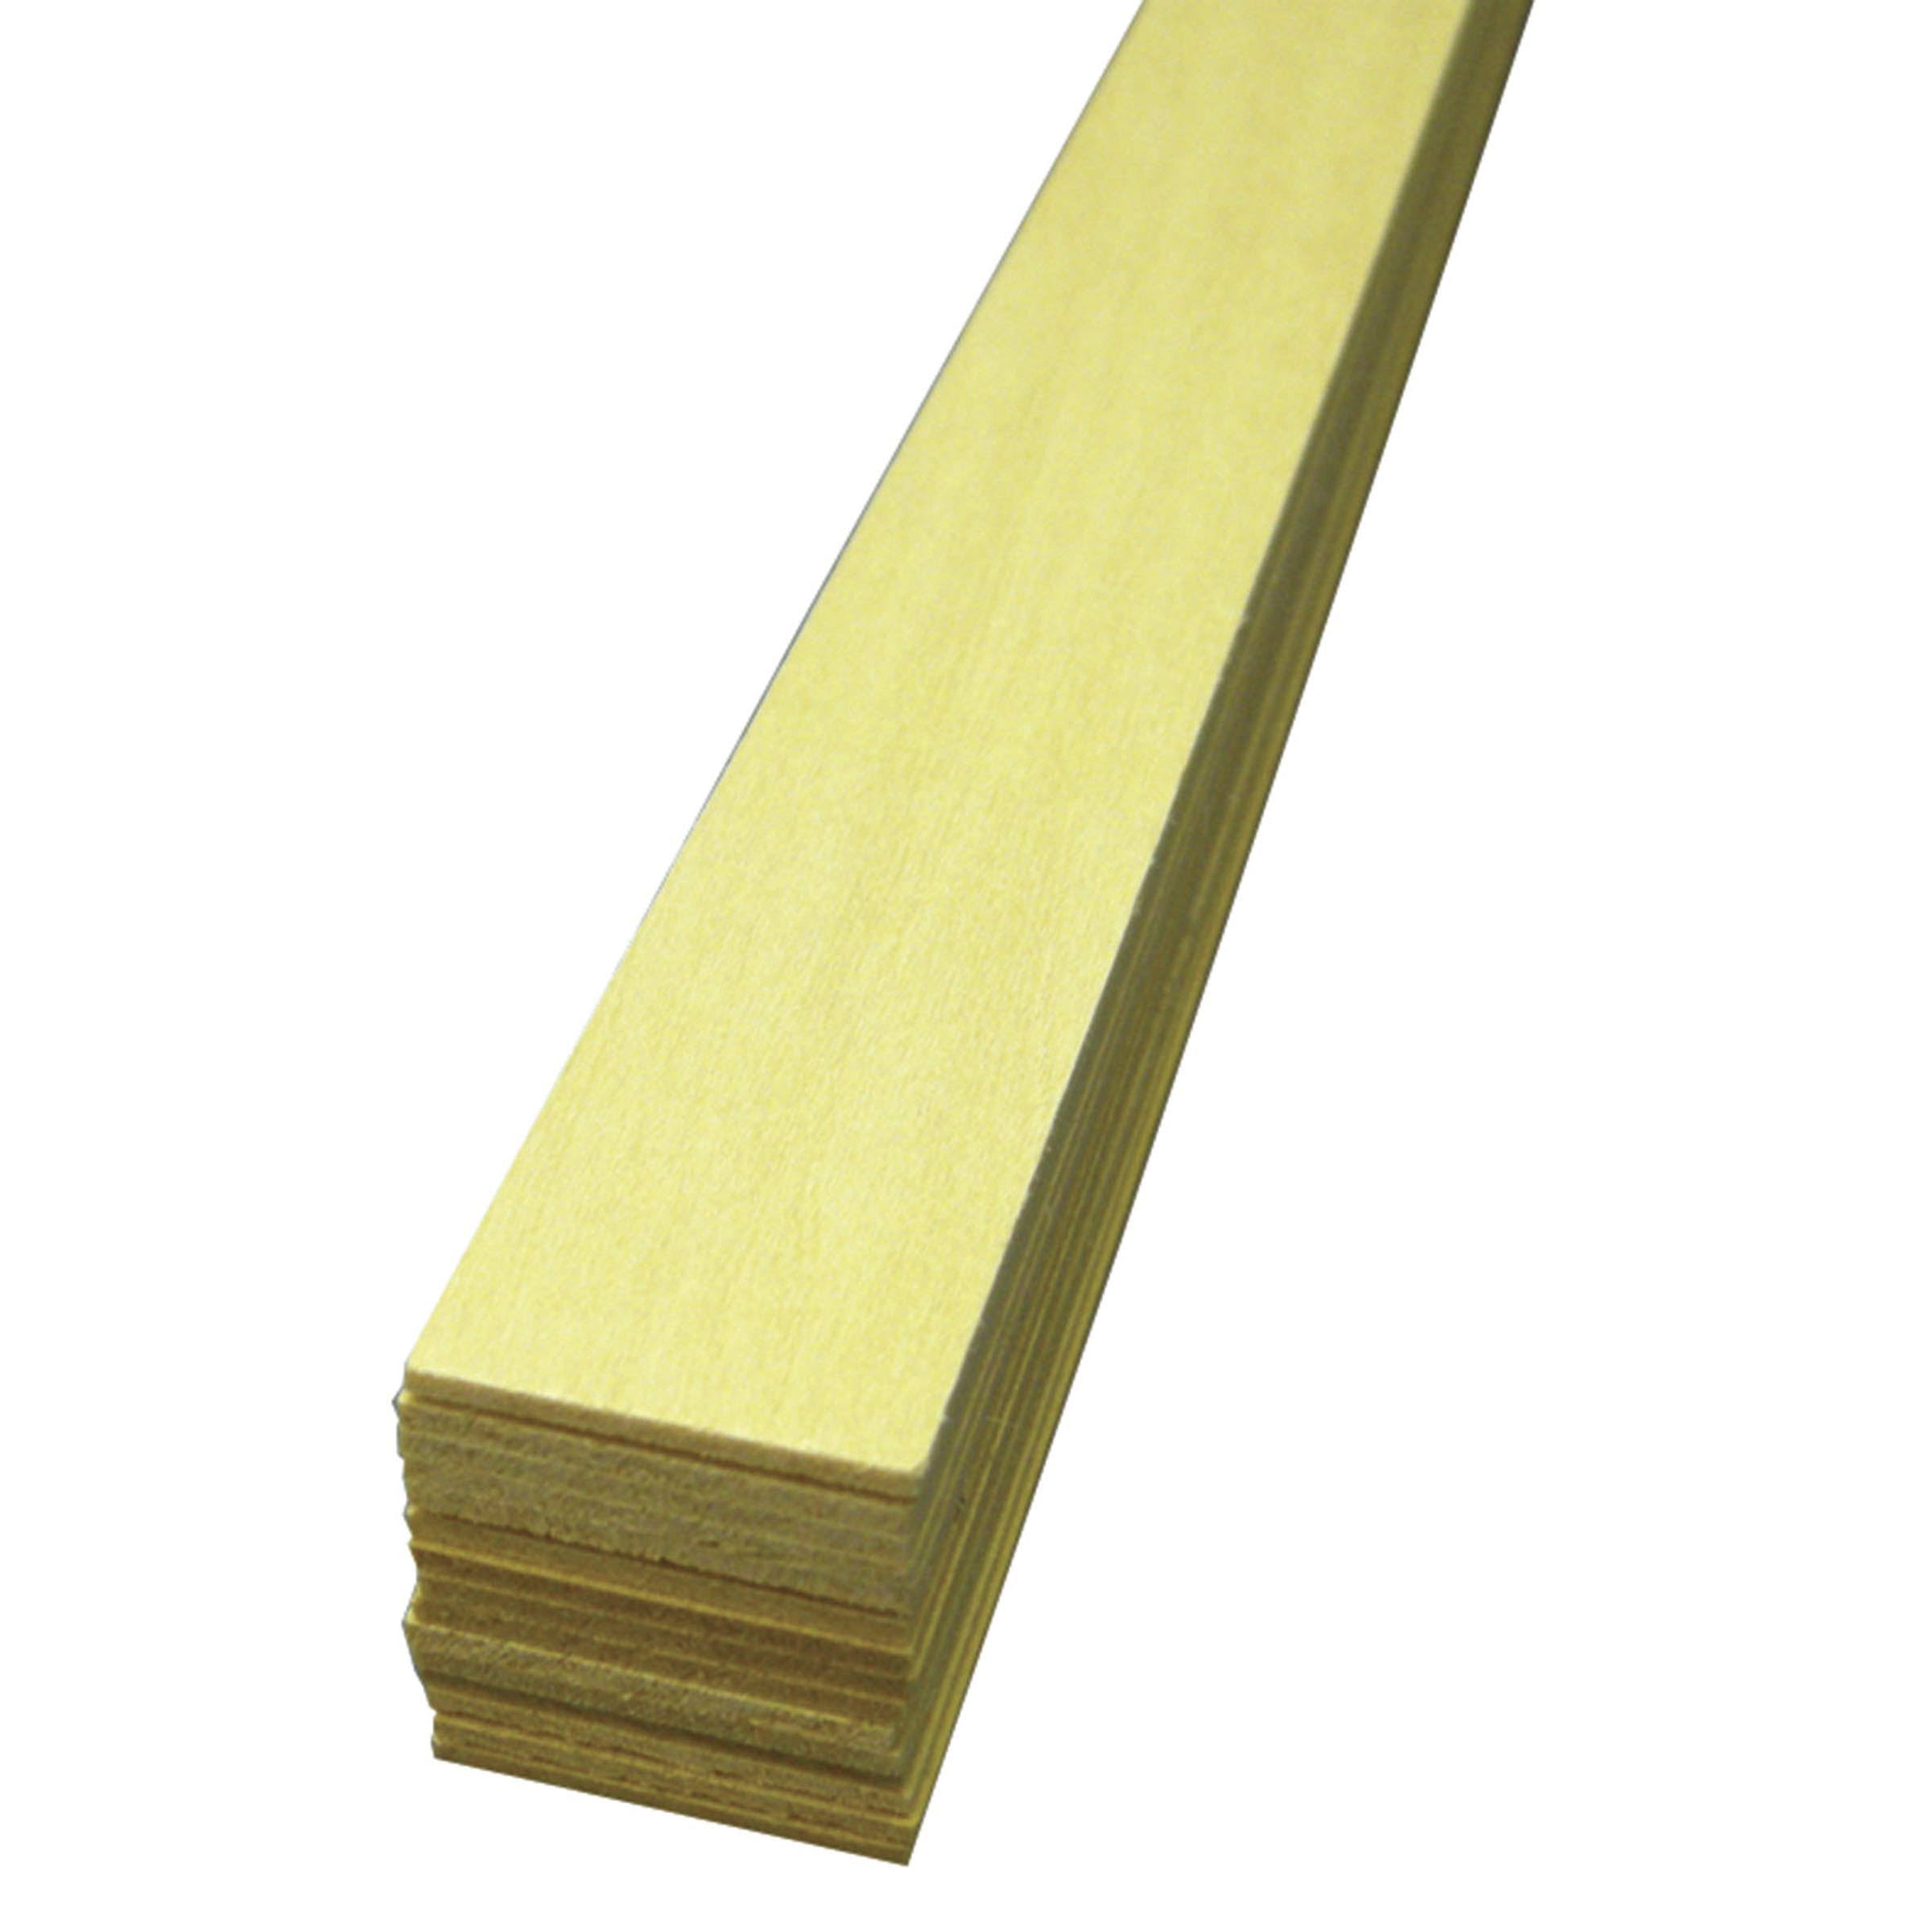 Midwest Basswood 1/16 x 1 x 24 (15) 4102